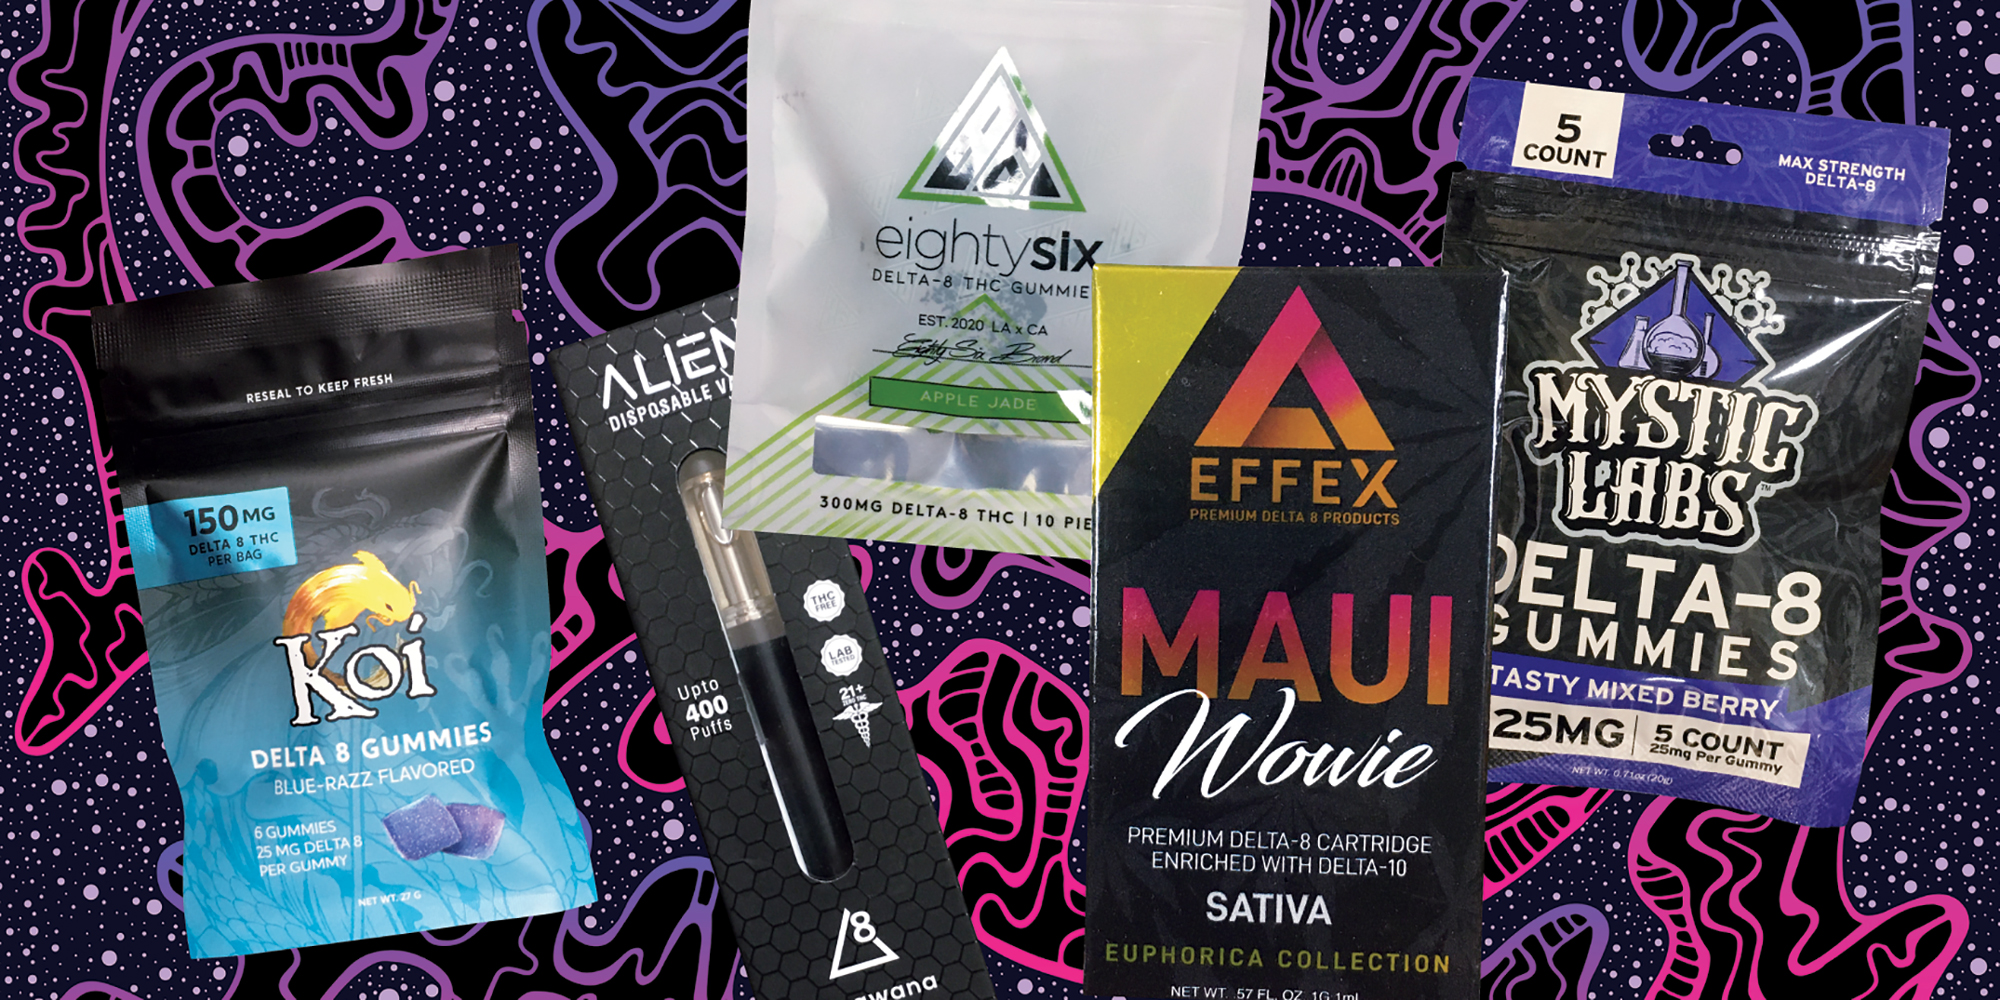 Delta 8 Thc Dabs - Products|Thc|Hemp|Brand|Gummies|Product|Delta-8|Cbd|Origin|Cannabis|Delta|Users|Effects|Cartridges|Brands|Range|List|Research|Usasource|Options|Benefits|Plant|Companies|Vape|Source|Results|Gummy|People|Space|High-Quality|Quality|Place|Overview|Flowers|Lab|Drug|Cannabinoids|Tinctures|Overviewproducts|Cartridge|Delta-8 Thc|Delta-8 Products|Delta-9 Thc|Delta-8 Brands|Usa Source|Delta-8 Thc Products|Cannabis Plant|Federal Level|United States|Delta-8 Gummies|Delta-8 Space|Health Canada|Delta Products|Delta-8 Thc Gummies|Delta-8 Companies|Vape Cartridges|Similar Benefits|Hemp Doctor|Brand Overviewproducts|Drug Test|High-Quality Products|Organic Hemp|San Jose|Editorial Team|Farm Bill|Overview Products|Wide Range|Psychoactive Properties|Reliable Provider|Boston Hempire